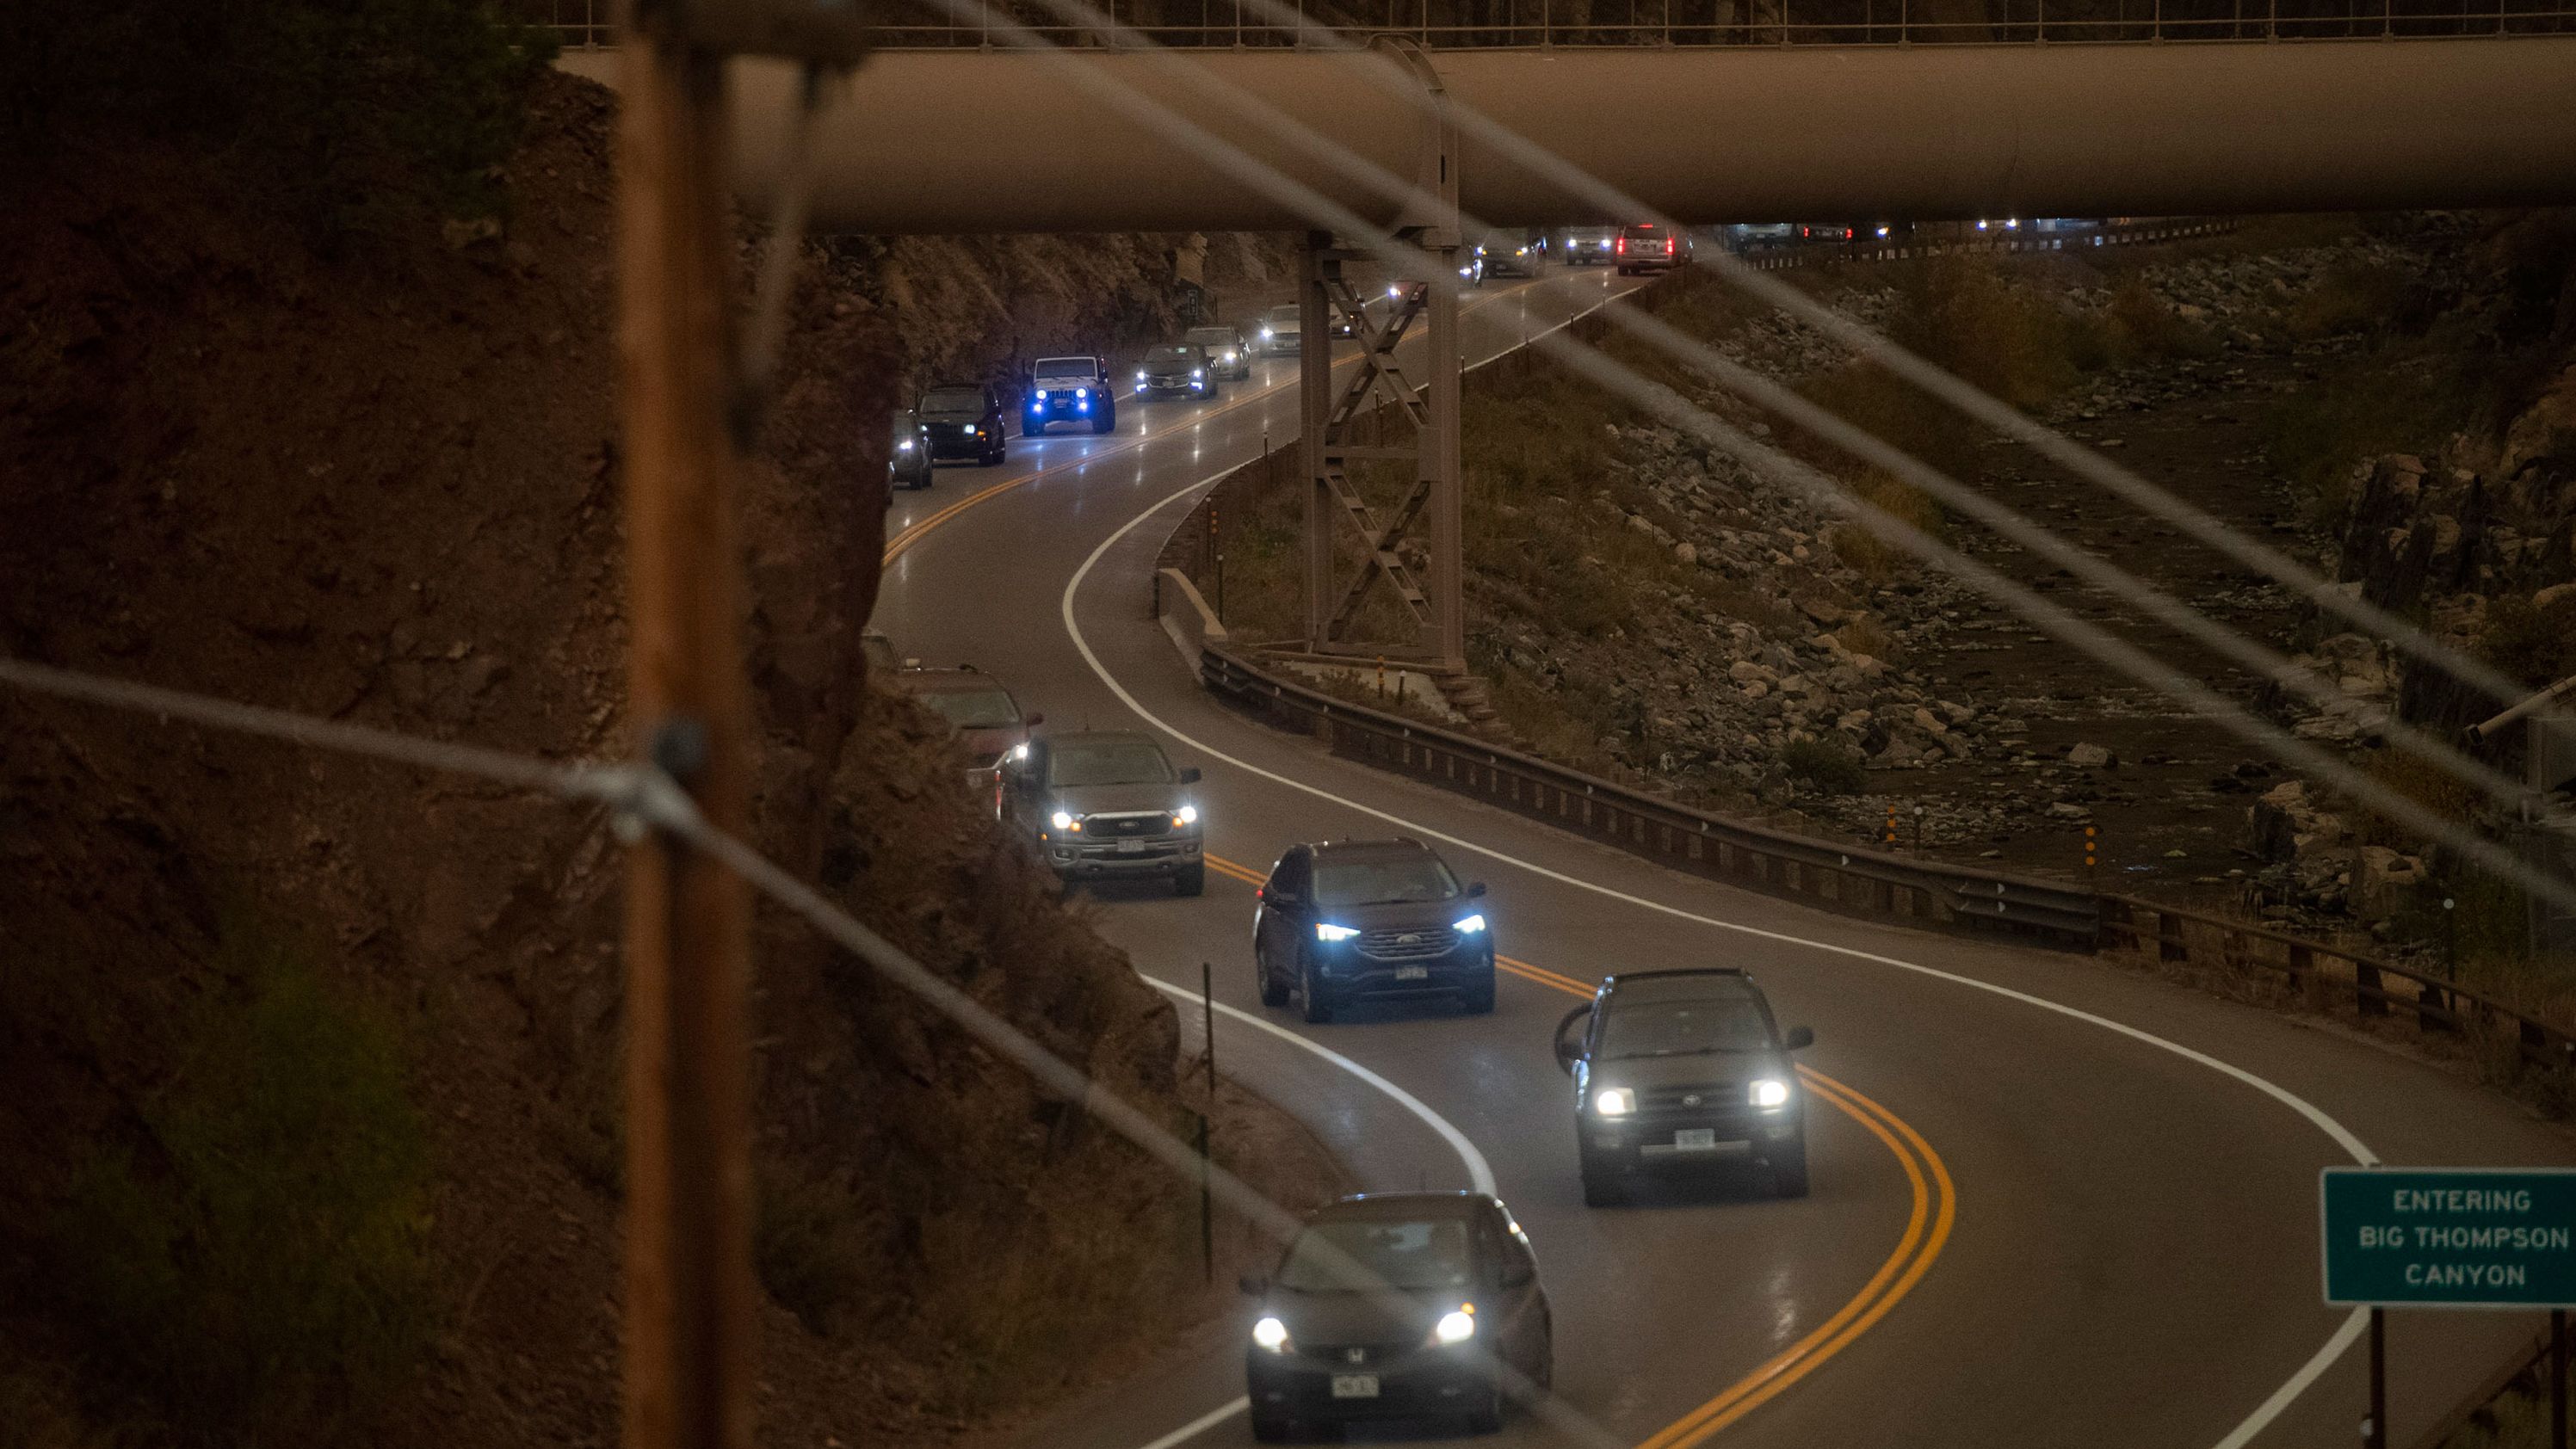 Evacuees drive through a traffic jam exiting Big Thompson Canyon as the East Troublesome Fire forced residents out of Estes Park, Colorado, on October 22, 2020.